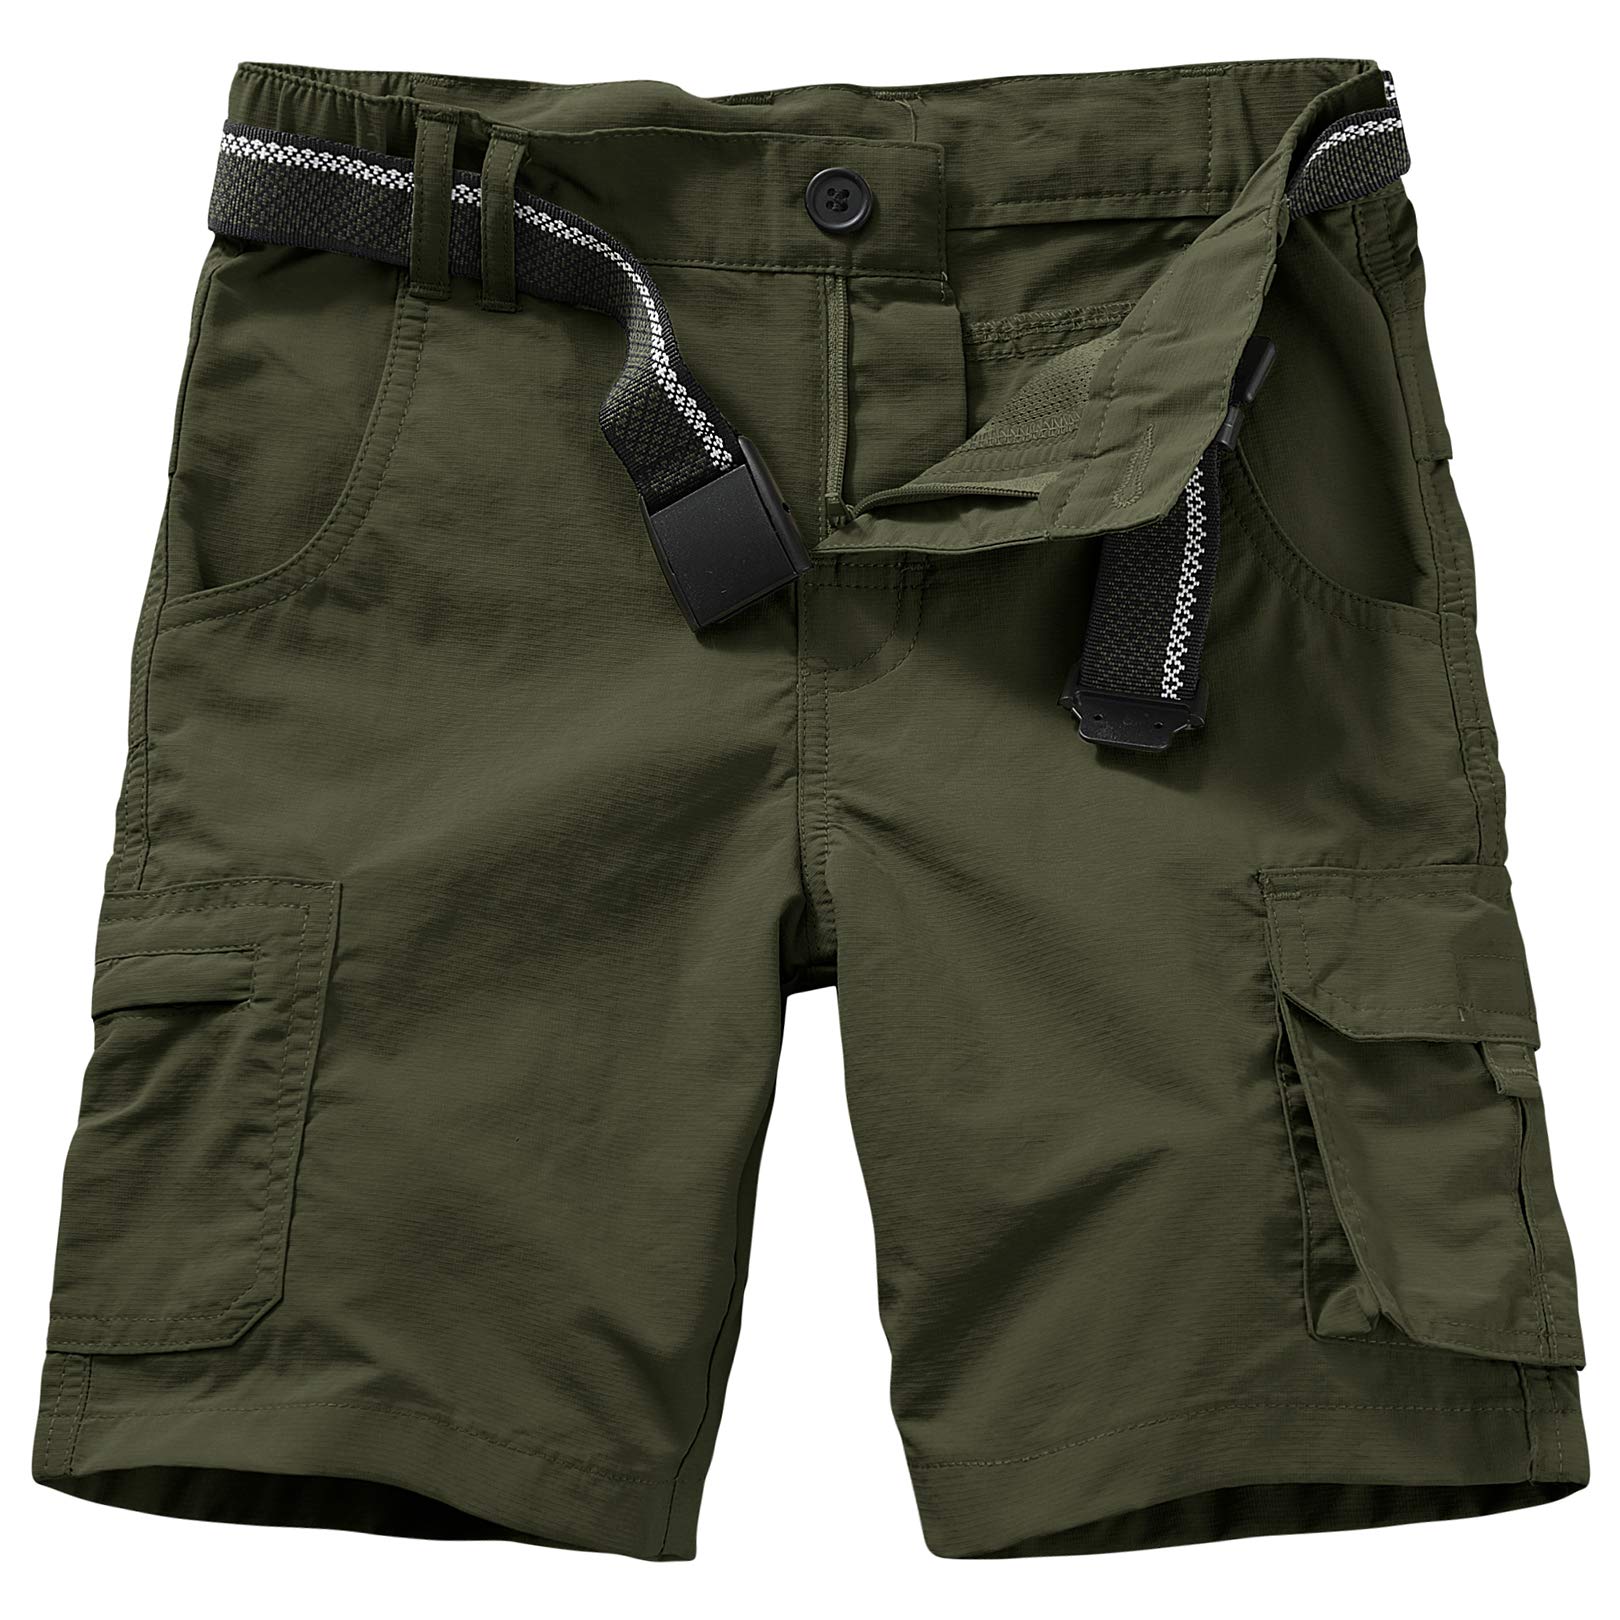 Kids Cargo Hiking Pants Boys Girls Youth Casual Lightweight Quick Dry  Waterproof Outdoor Scout Uniform Pants 1 # Army Green 12 Years